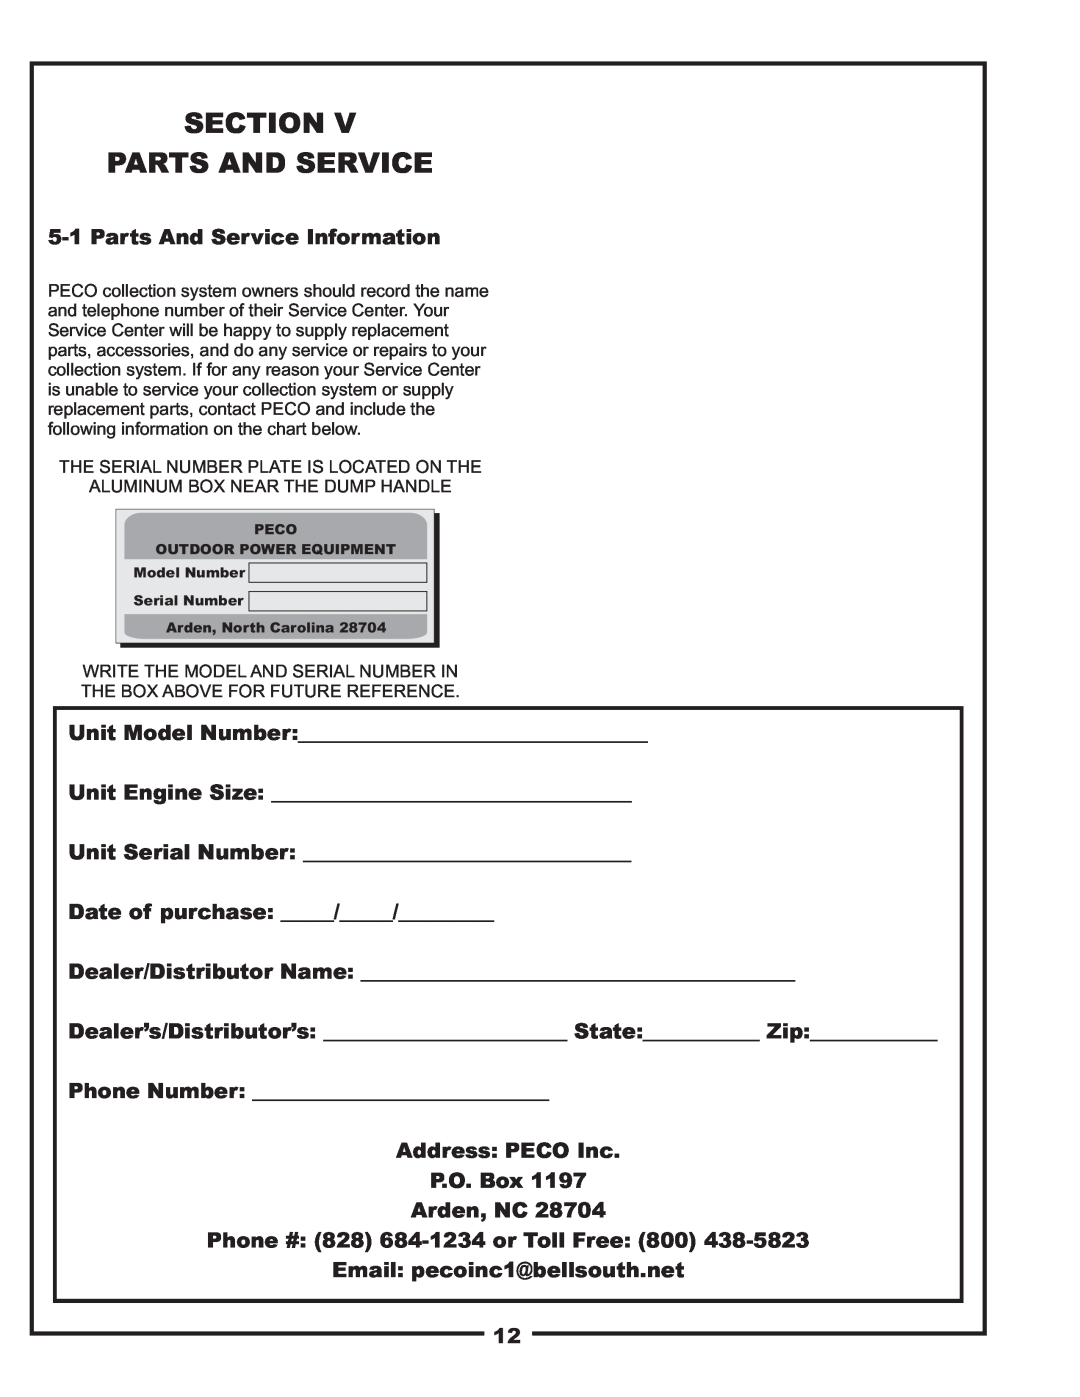 Gravely 12621209-12 Section Parts And Service, Parts And Service Information, Date of purchase Dealer/Distributor Name 